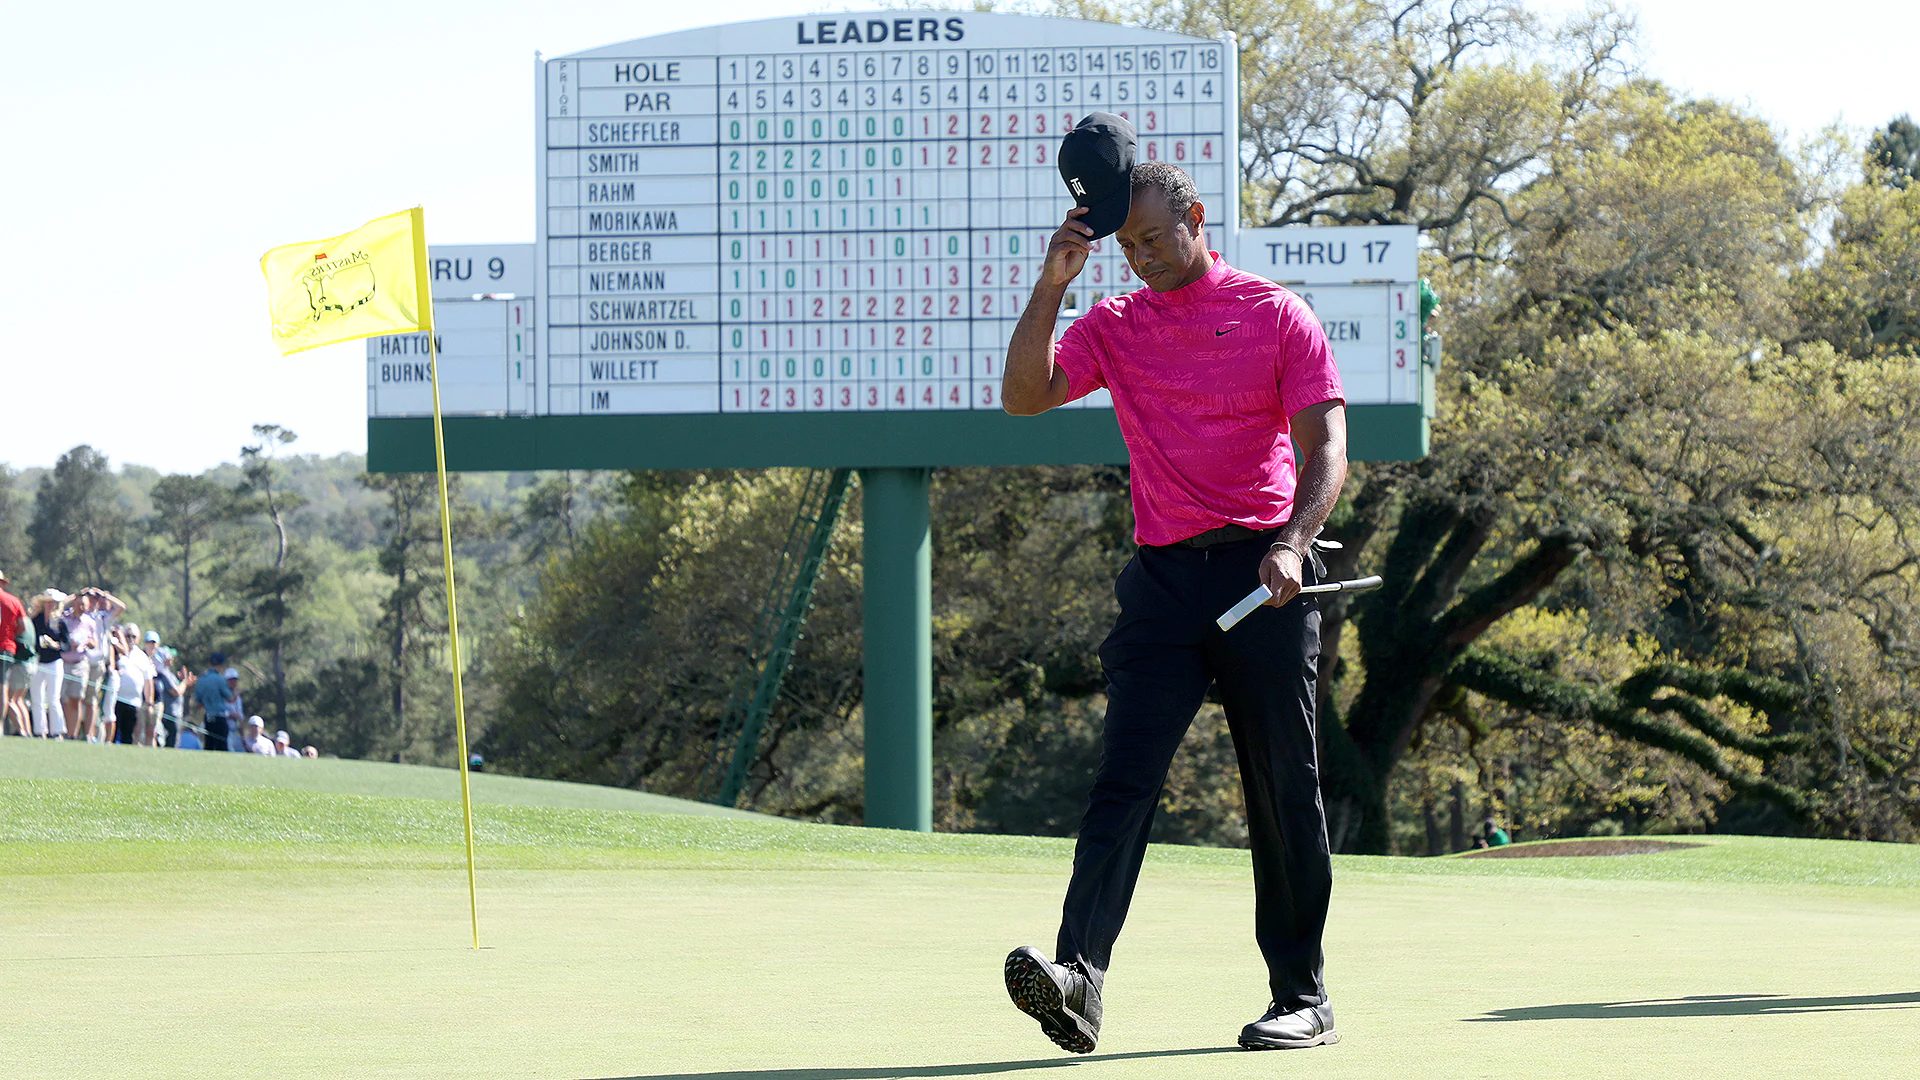 2022 Masters: Every step, every 71 swings, Thursday was another full day of work for Tiger Woods